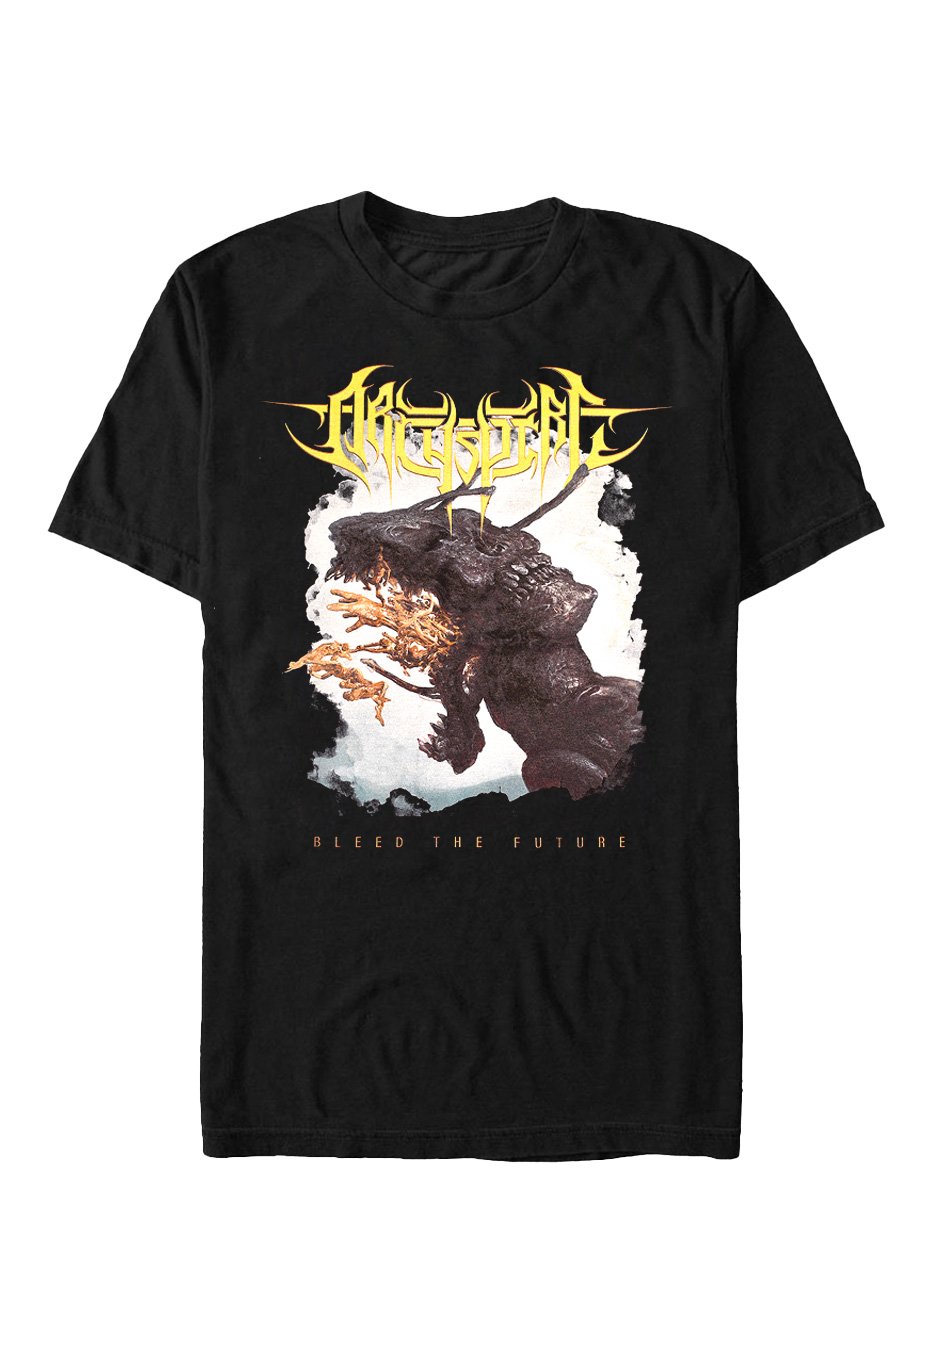 Archspire - Bleed The Future Cover - T-Shirt